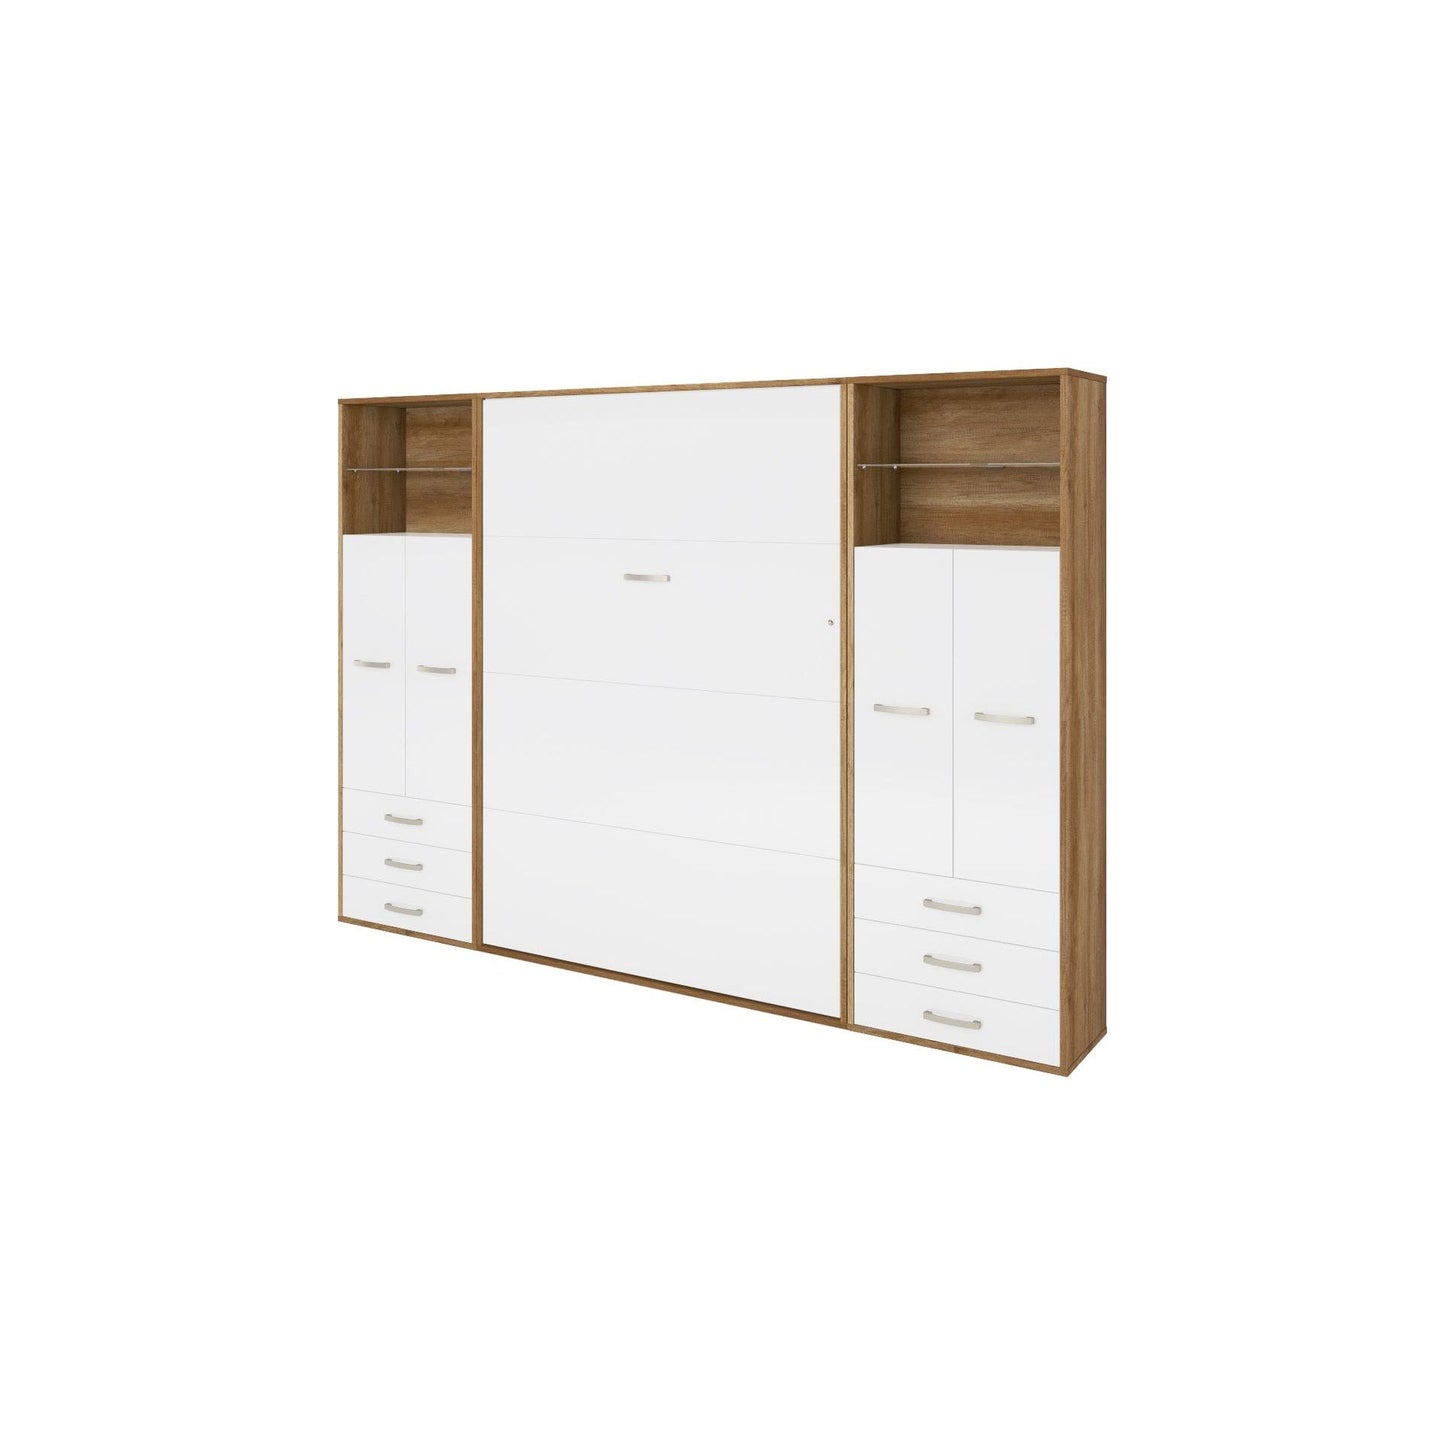 Maxima House Maxima House Vertical Wall Bed Invento, European Full Size with 2 cabinets Oak Country/White IN120V-10OW